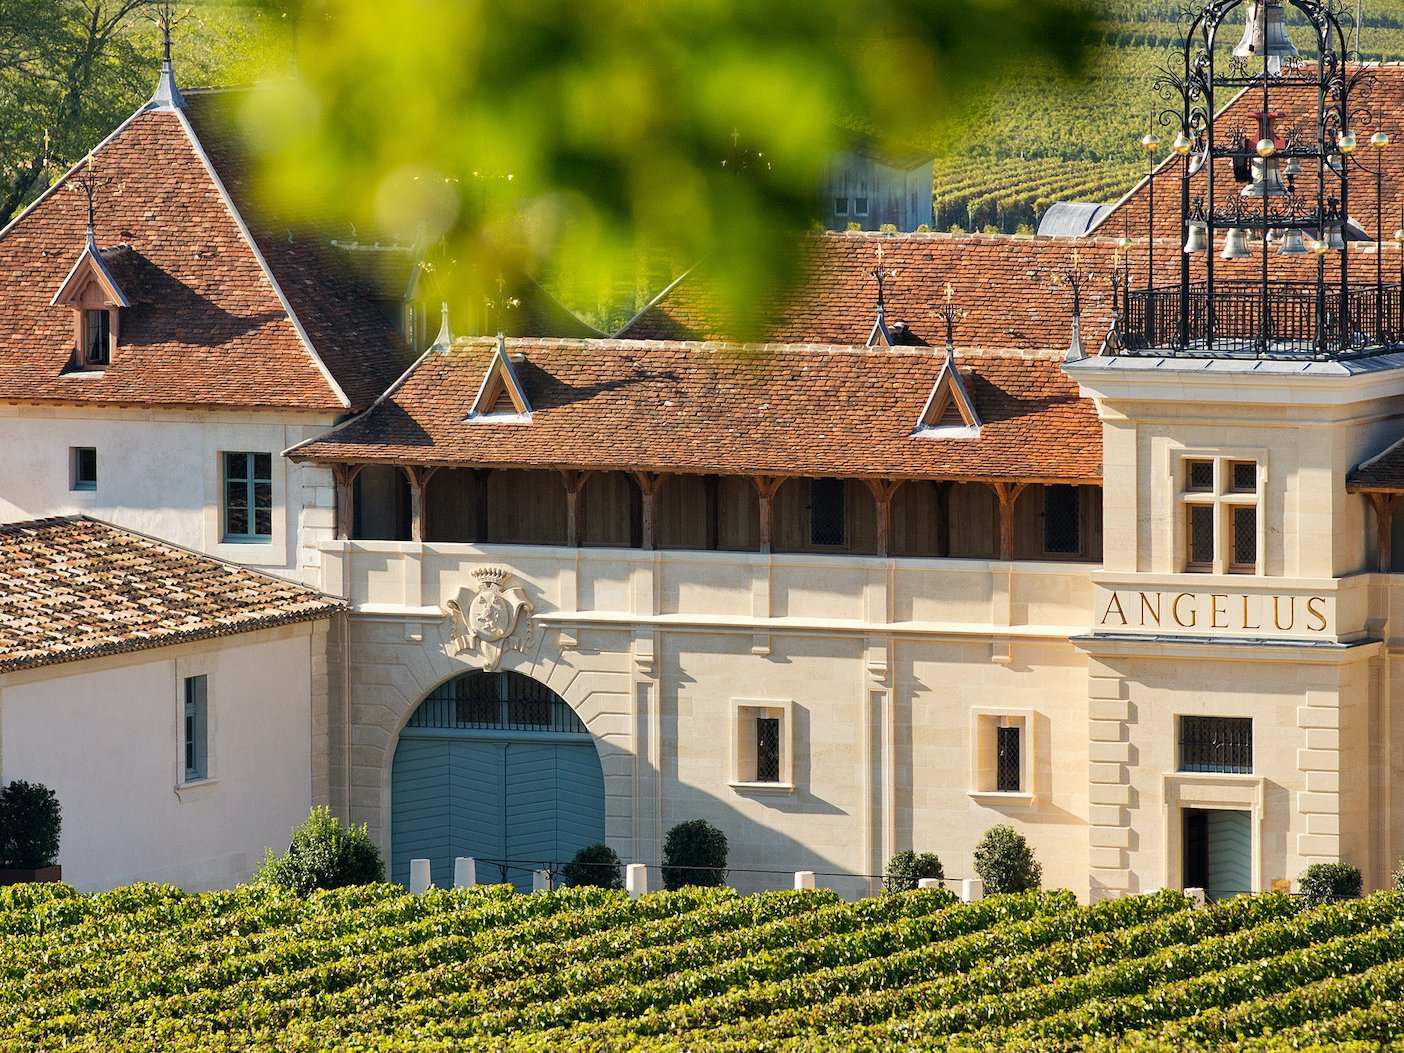 Château Angélus is one of the best and most prestigious estates in Saint-Émilion on the Gironde’s Right Bank.